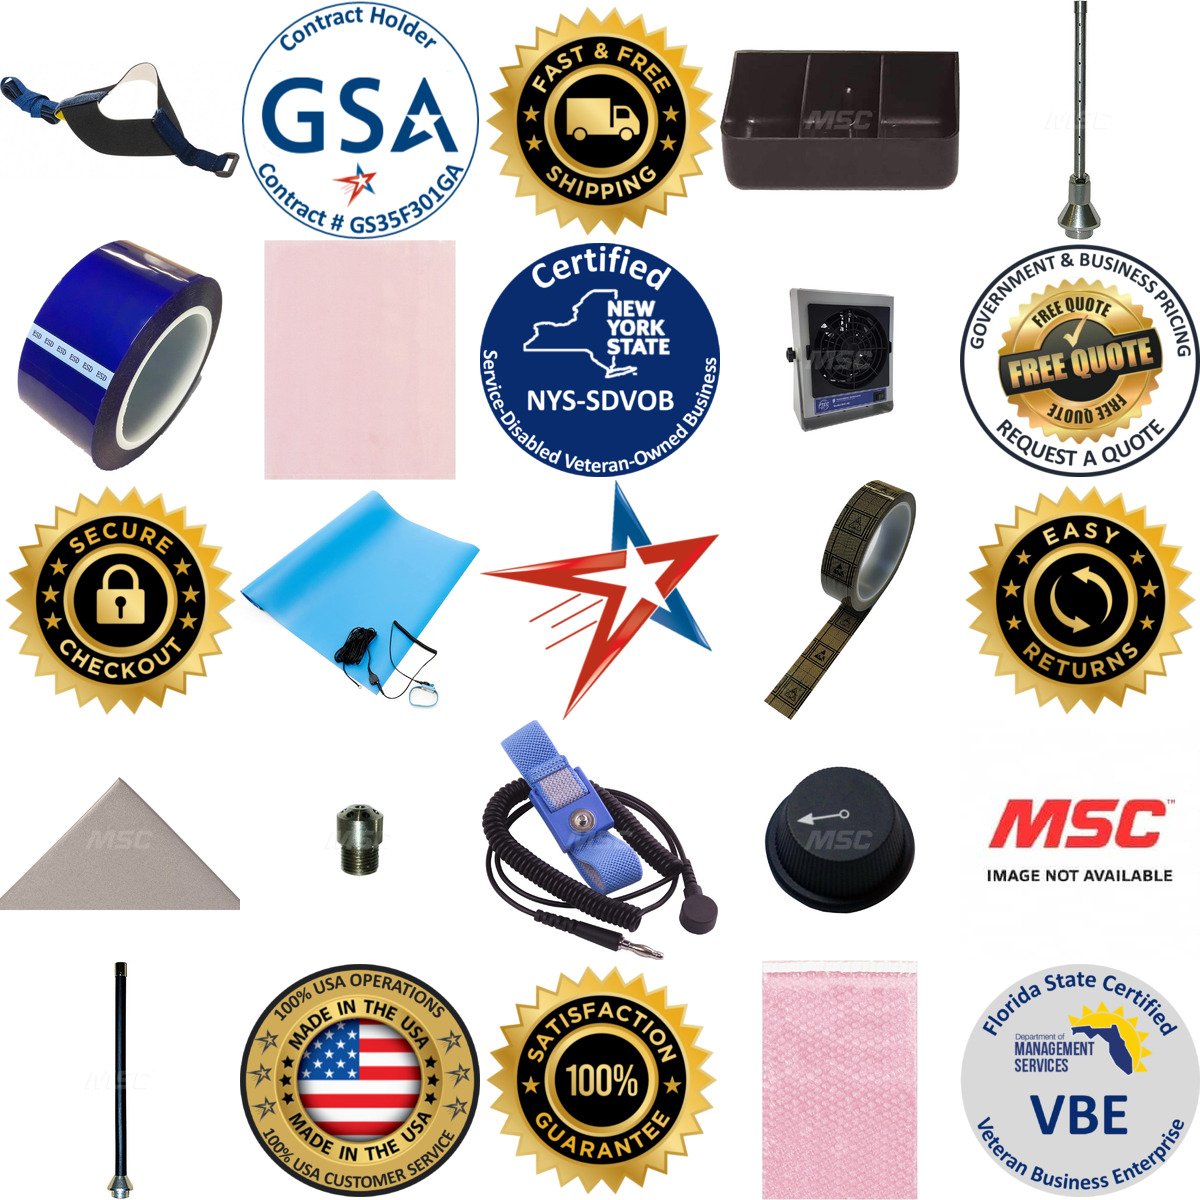 A selection of Anti Static and Esd Equipment products on GoVets